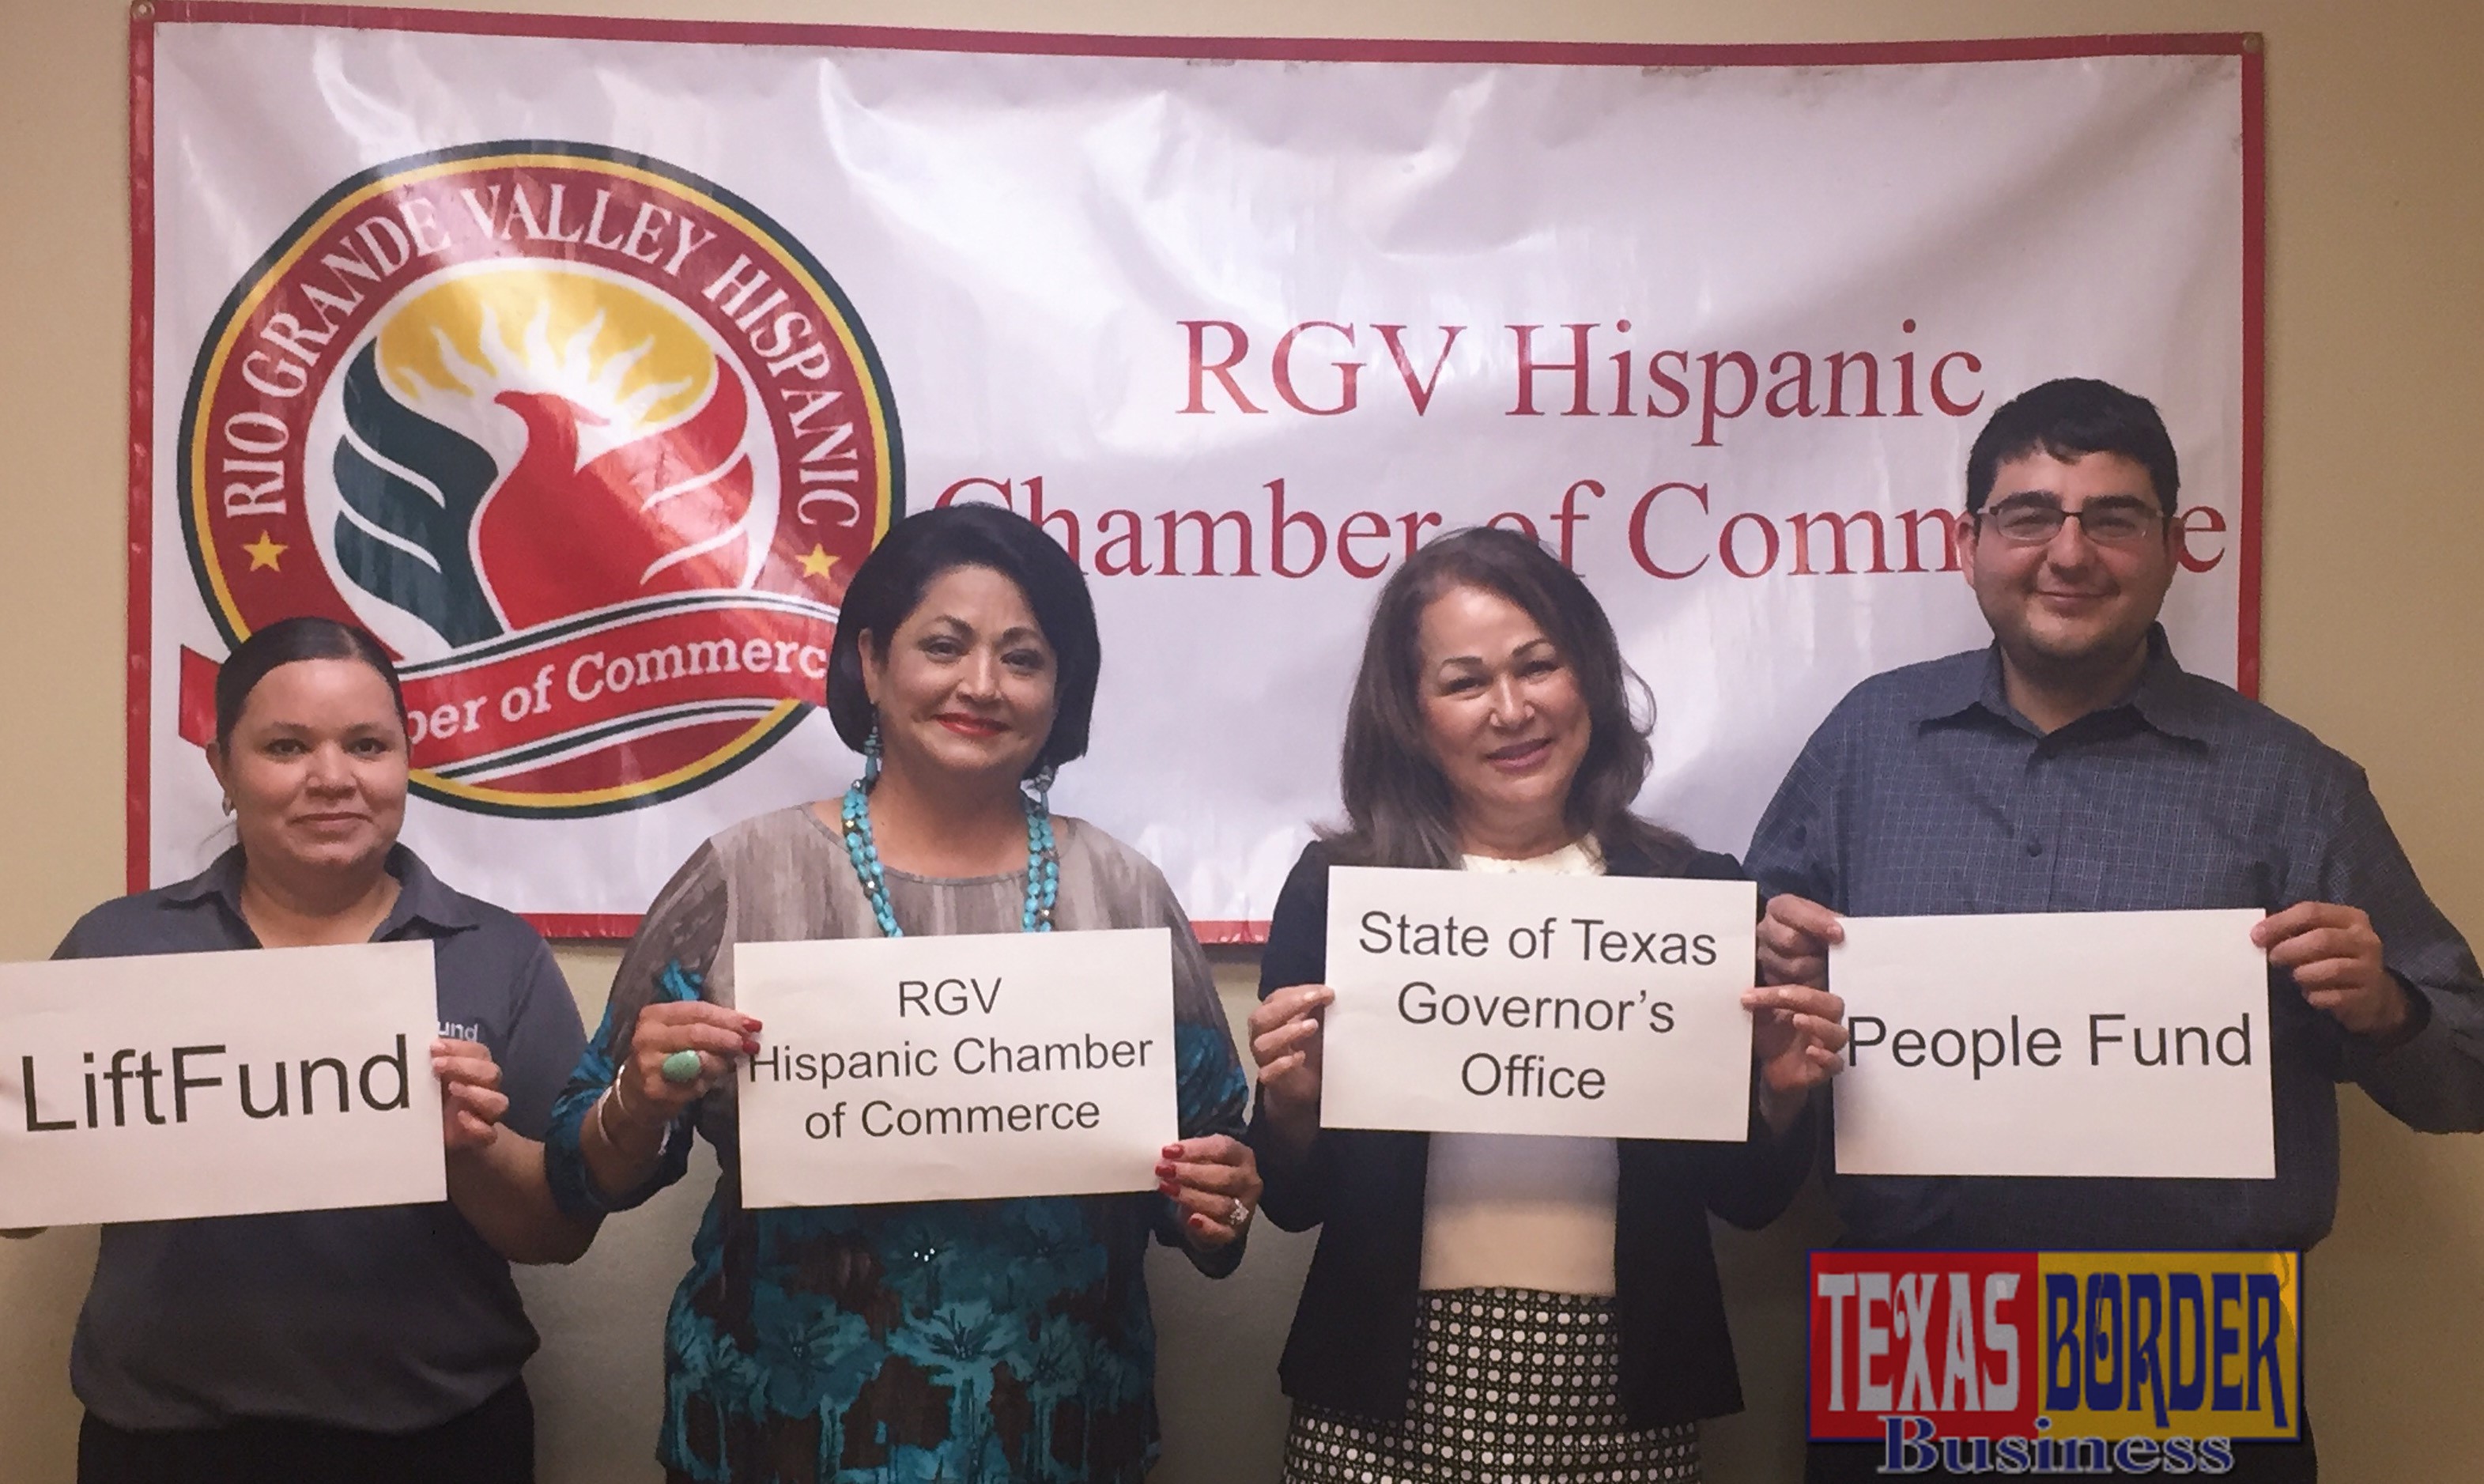 Shown gathered to discuss the workshop are left to right:  Marlene Rodriguez, LiftFund; Cynthia M. Sakulenzki, RGV Hispanic Chamber; Leticia Flores, Texas Governor’s Office and Jesse Sanchez, PeopleFund.  Not shown are Balde Morales, UTRGV Small Business Development Center and Maria Perez, SBA; Dalinda Guillen, RGV Economic Development Corp. Exec. Director and Rose Benavidez, Starr County ED Foundation President.